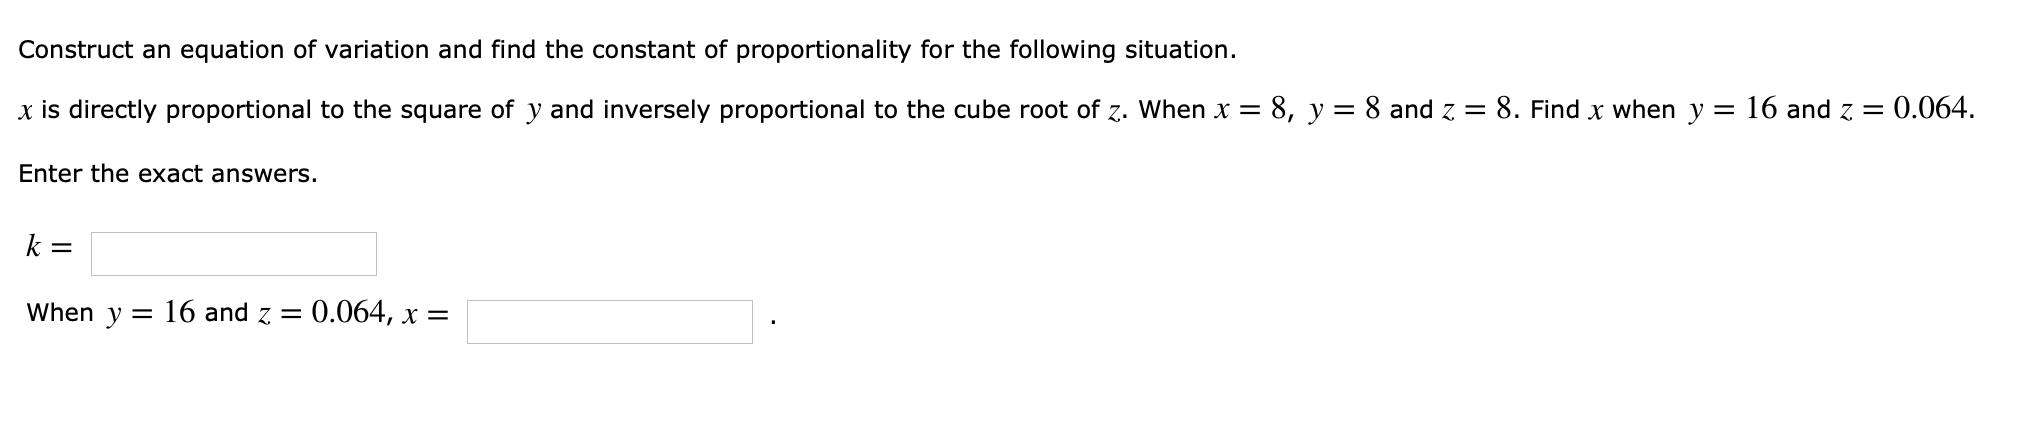 Construct an equation of variation and find the constant of proportionality for the following situation
x is directly proportional to the square of y and inversely proportional to the cube root of when x = 8, y = 8 and Z-8. Find x when y = 16 and
Enter the exact answers.
k=
When y = 16 and Z = 0.064, x
= O.064.
